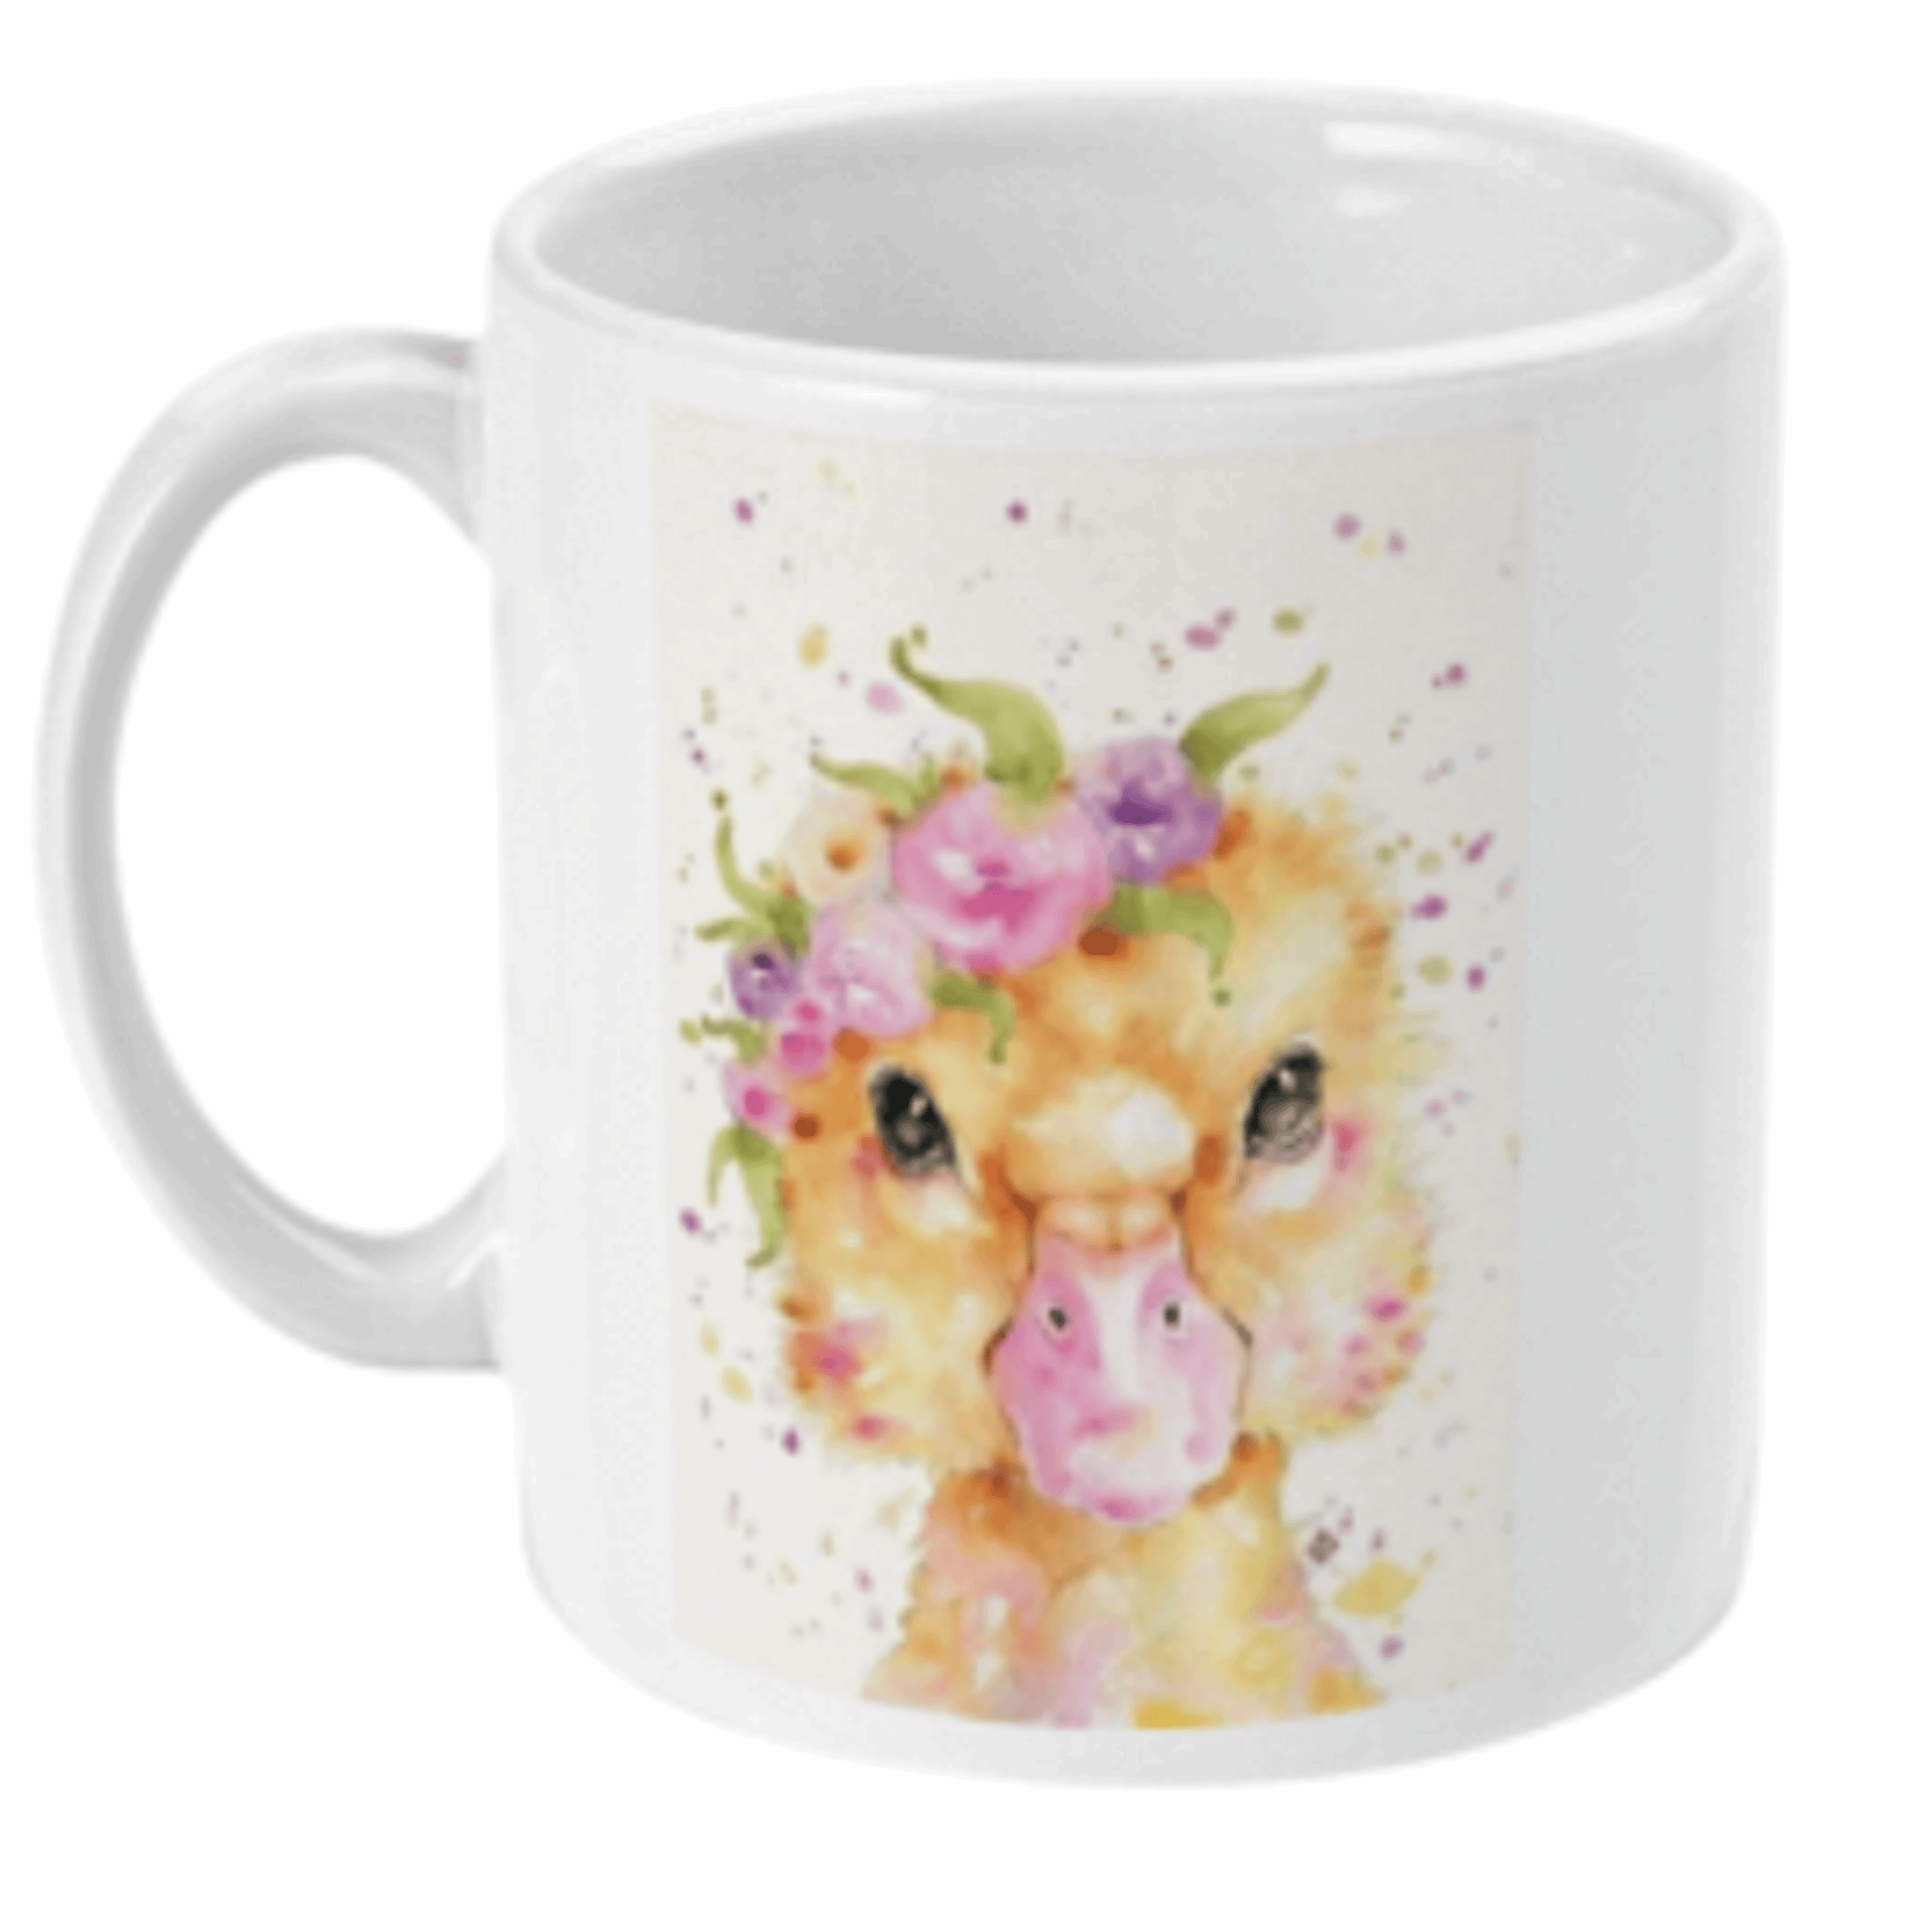  Beautiful Water Colour Duckling Coffee Mug by Free Spirit Accessories sold by Free Spirit Accessories